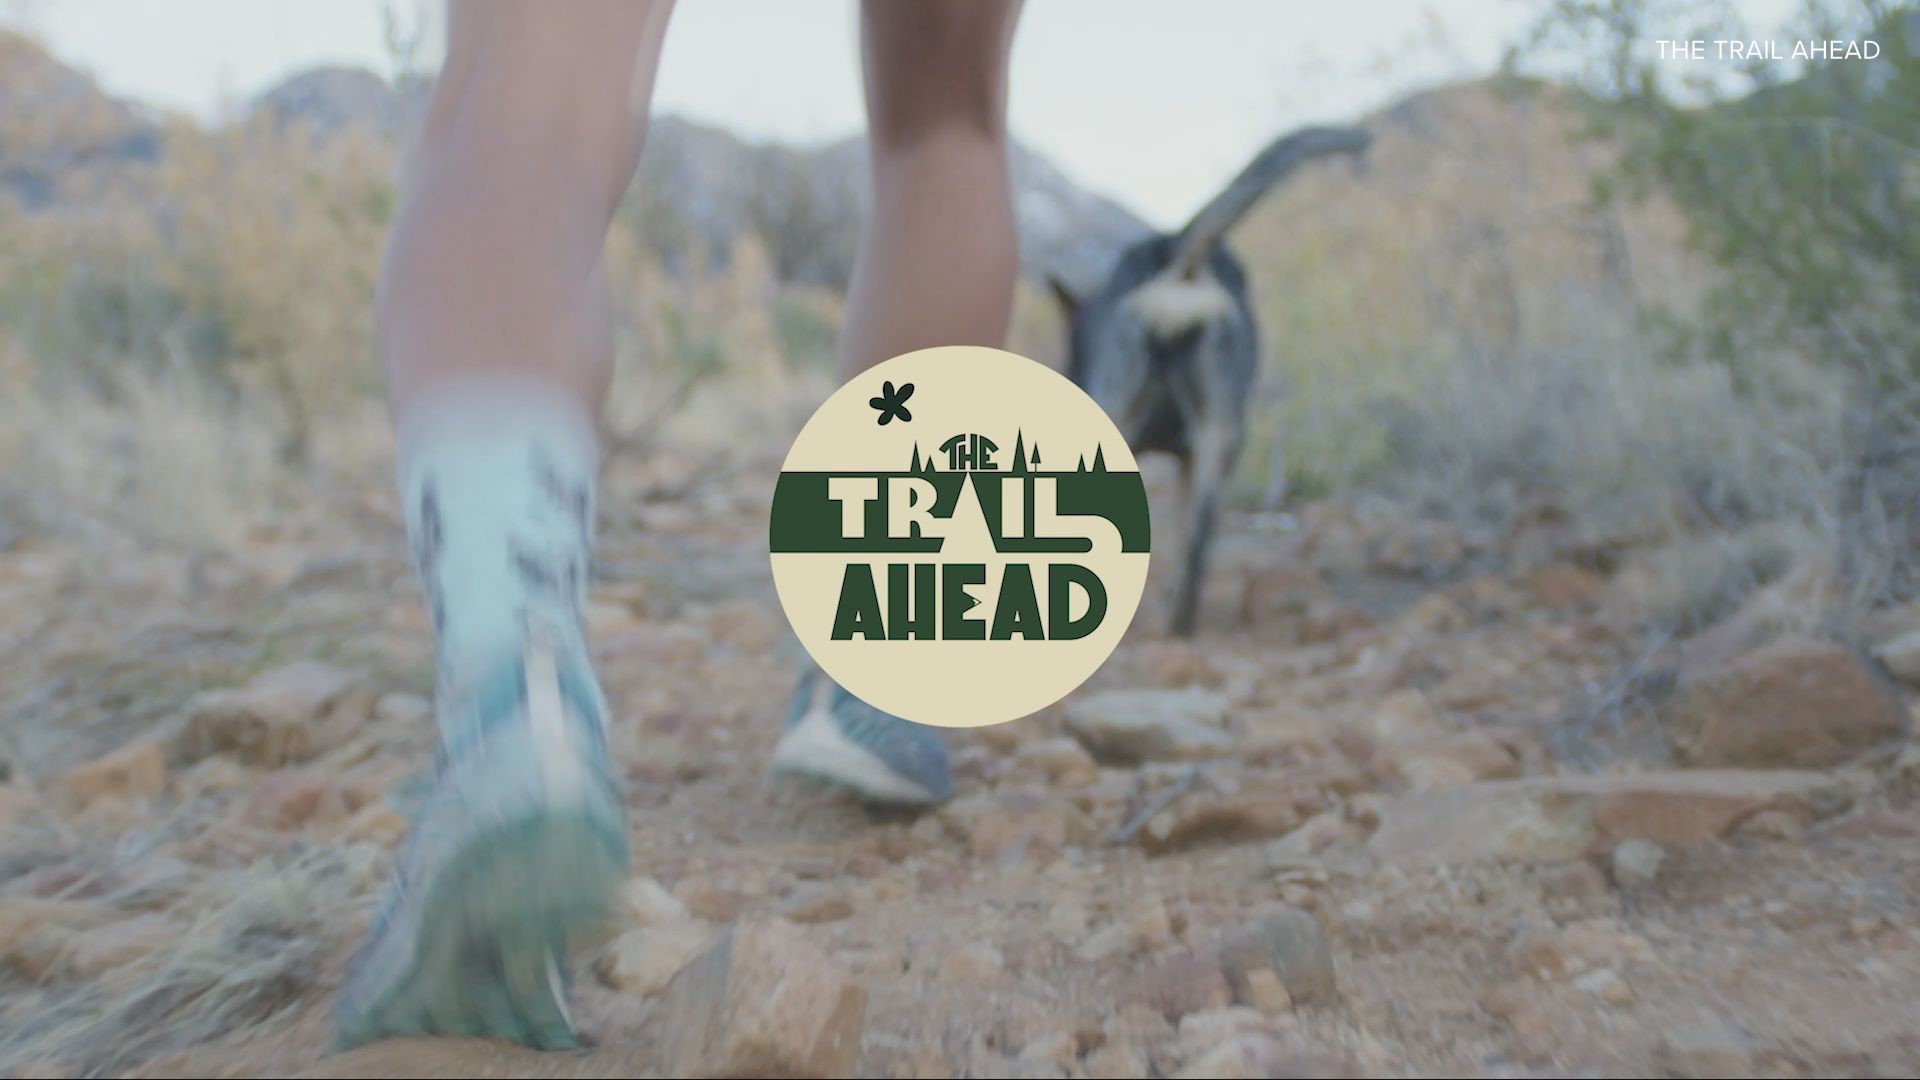 The Trail Ahead podcast tackles issues of race, equality, and access in the outdoors.